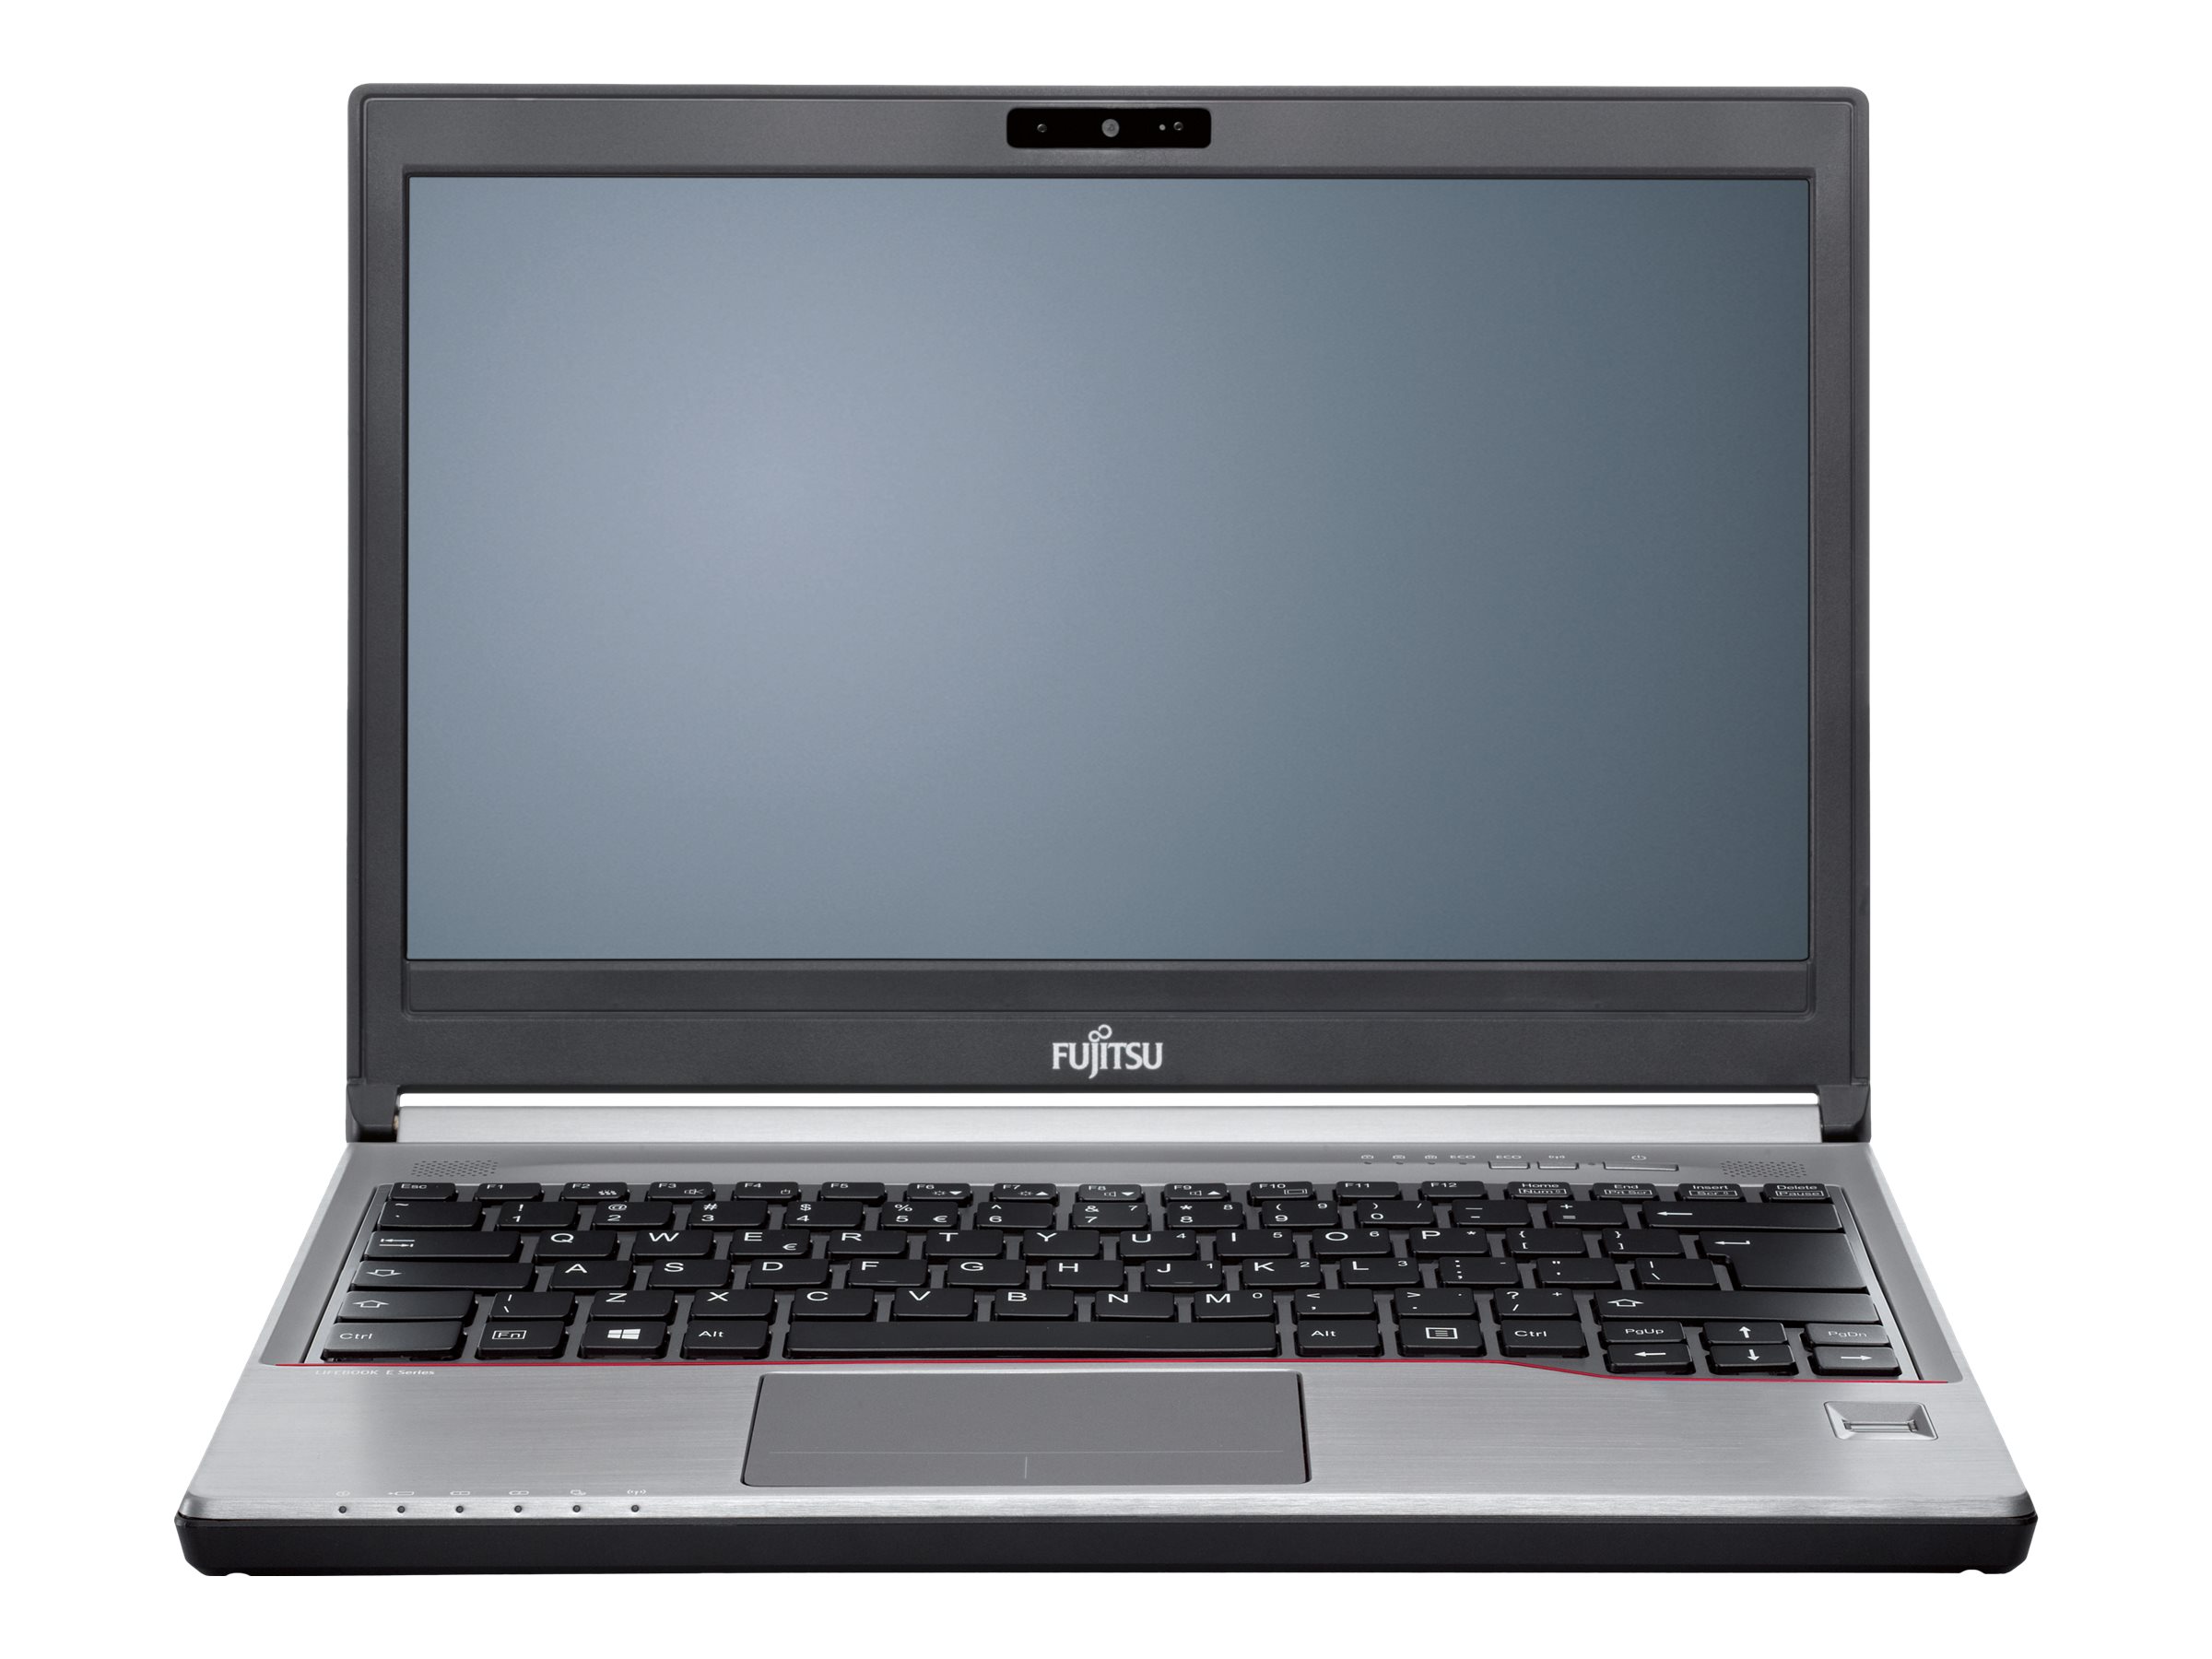 Fujitsu LIFEBOOK E756 - full specs, details and review